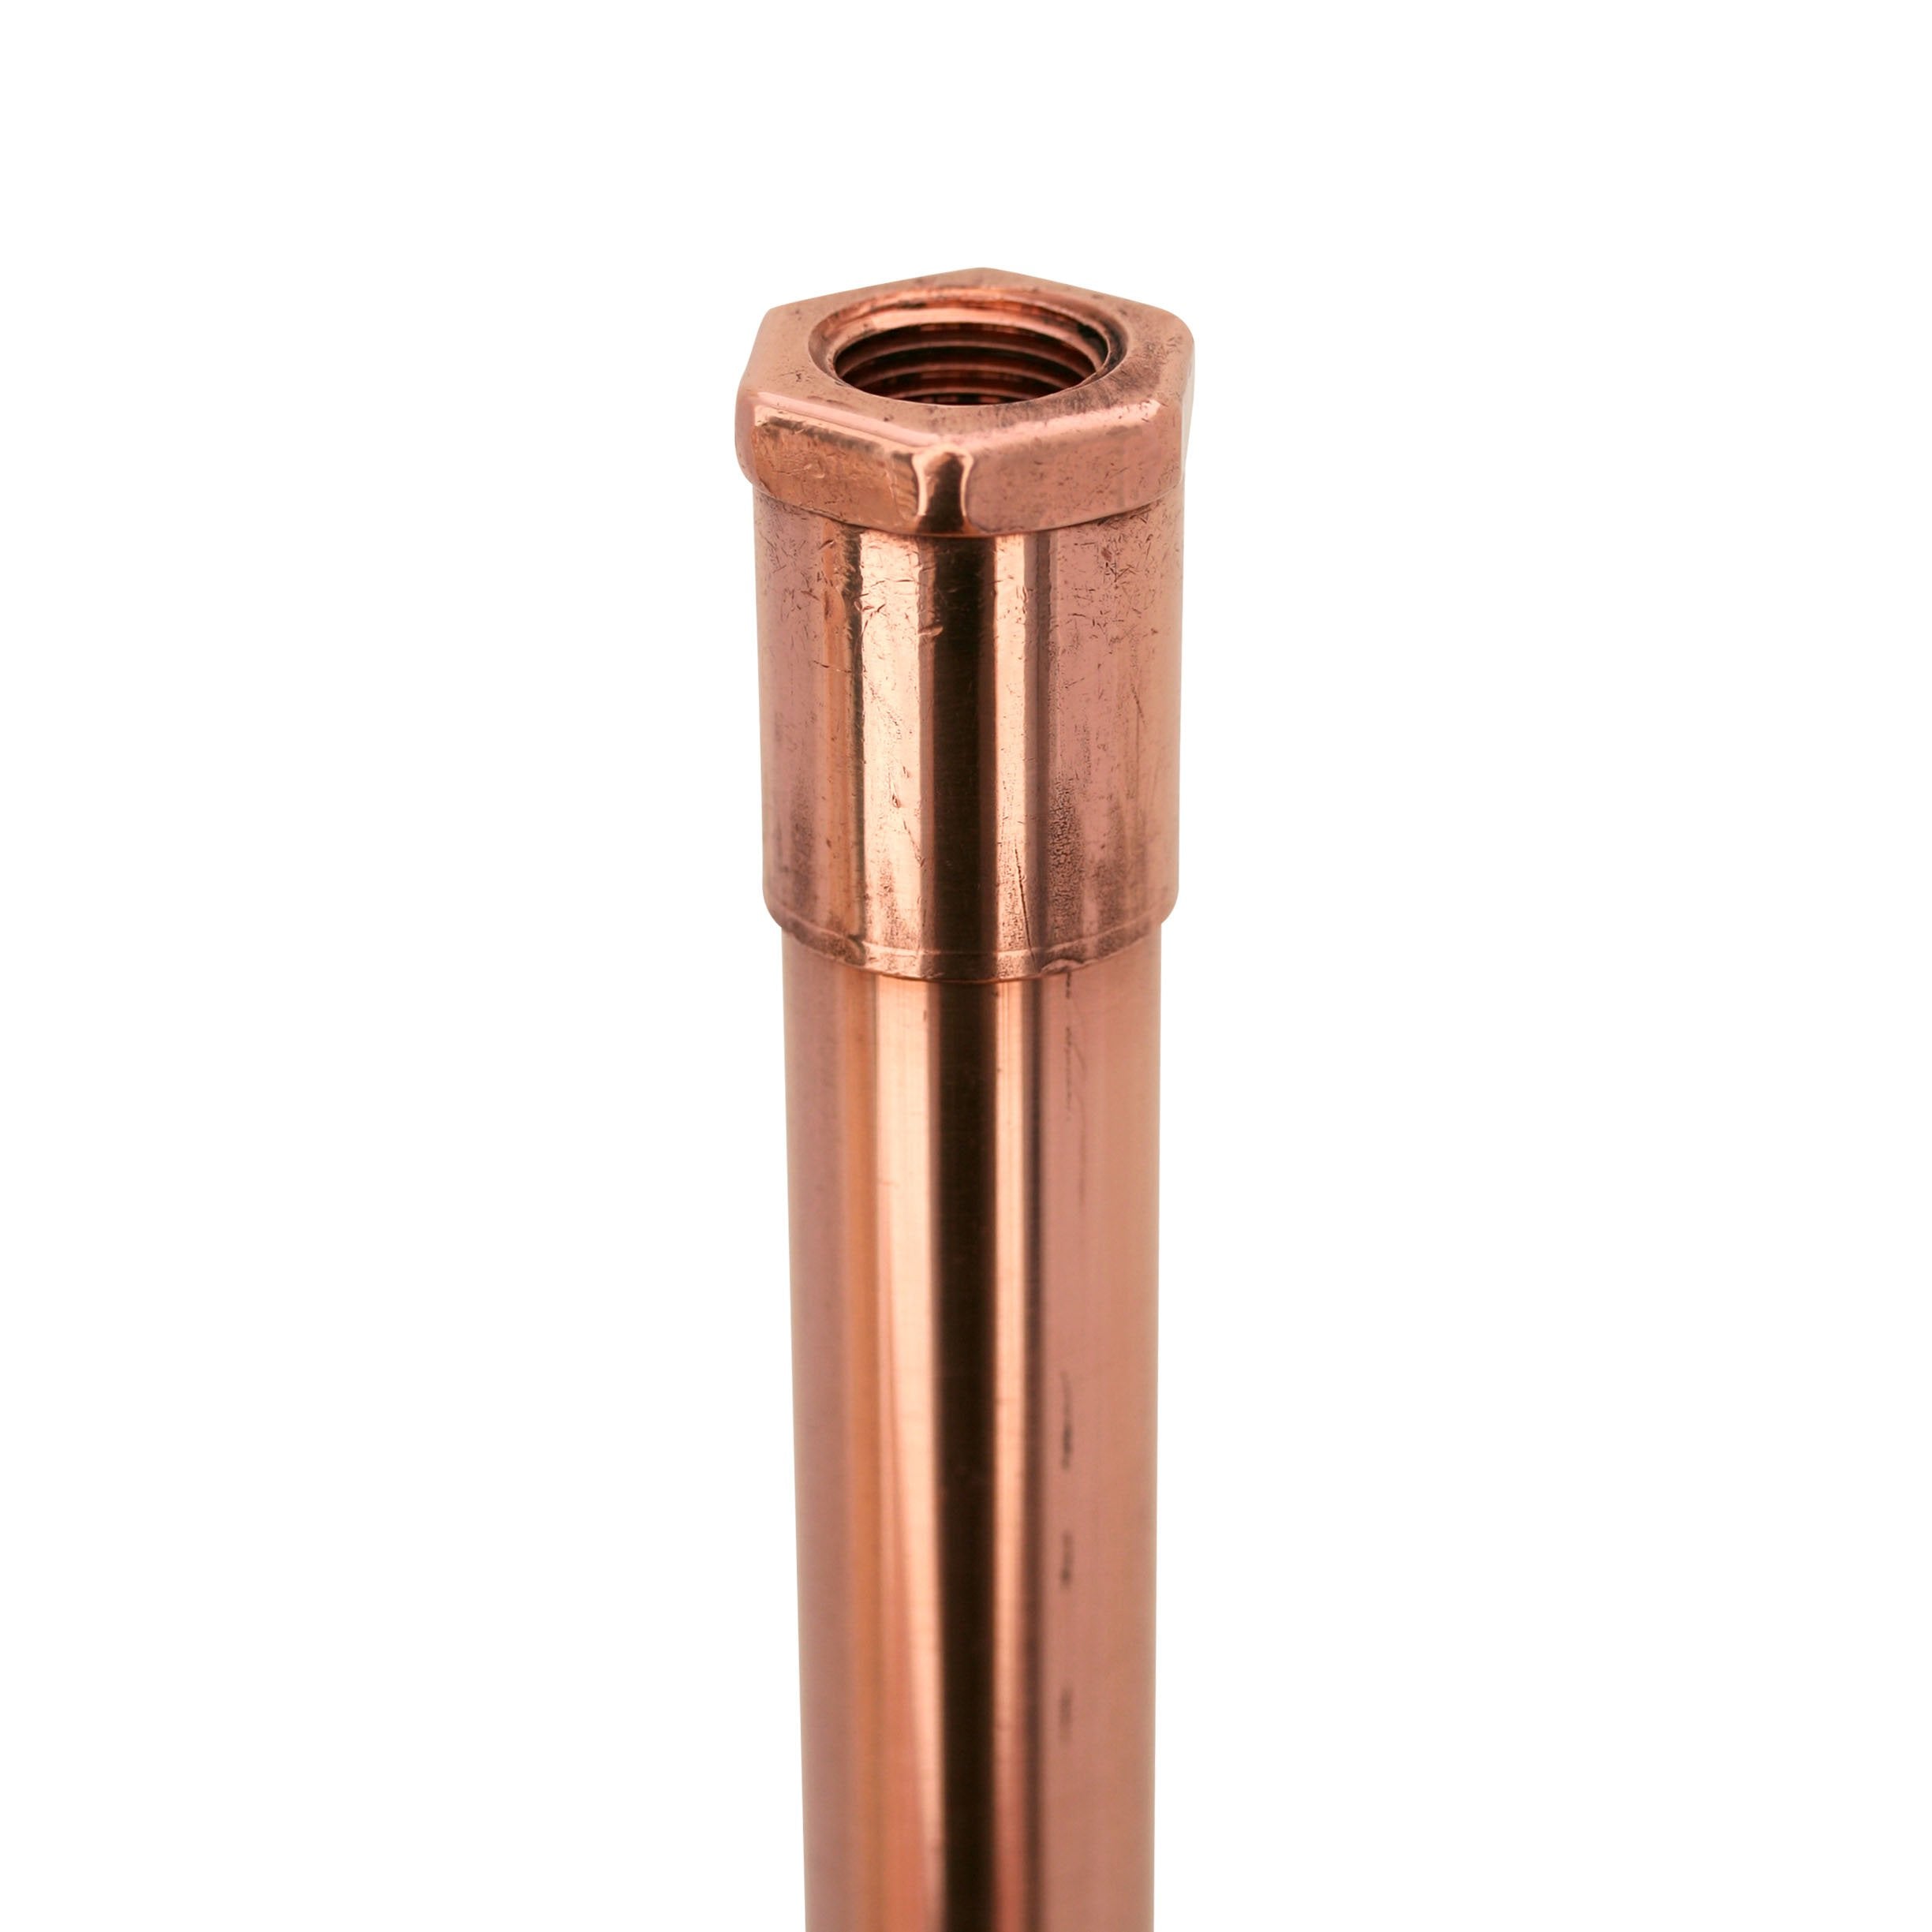 CopperMoon Custom Copper Stem ONLY for CM.16 path light